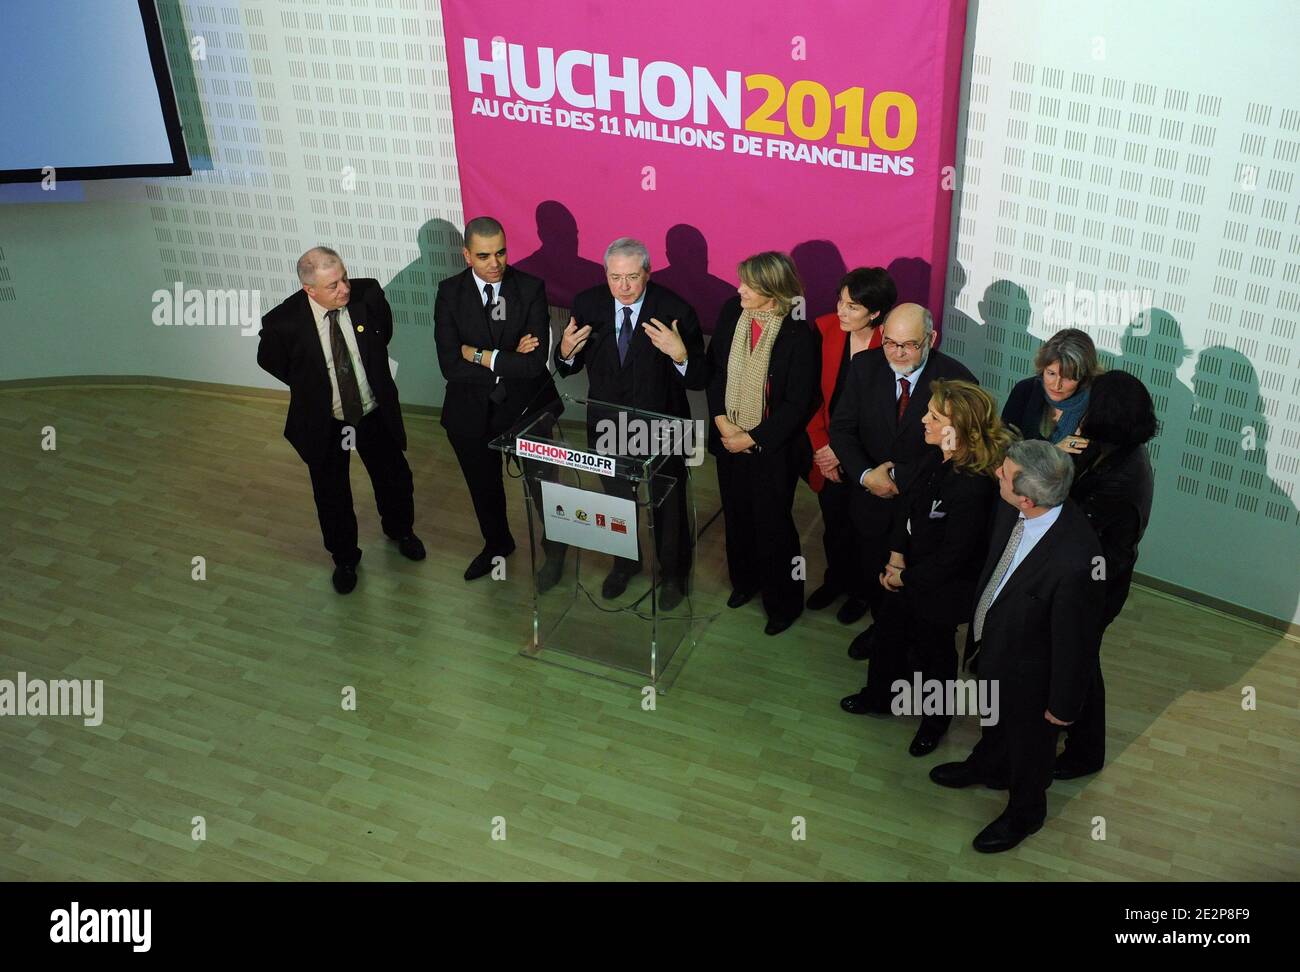 Jean-Paul Huchon, outgoing president of the Regional Council of Ile de France, and candidate to his own succession delivers a speech in presence of his heads of list after the results of the first round of the regional elections in Paris, France on March 14, 2010. Photo by Mousse/ABACAPRESS.COM Stock Photo